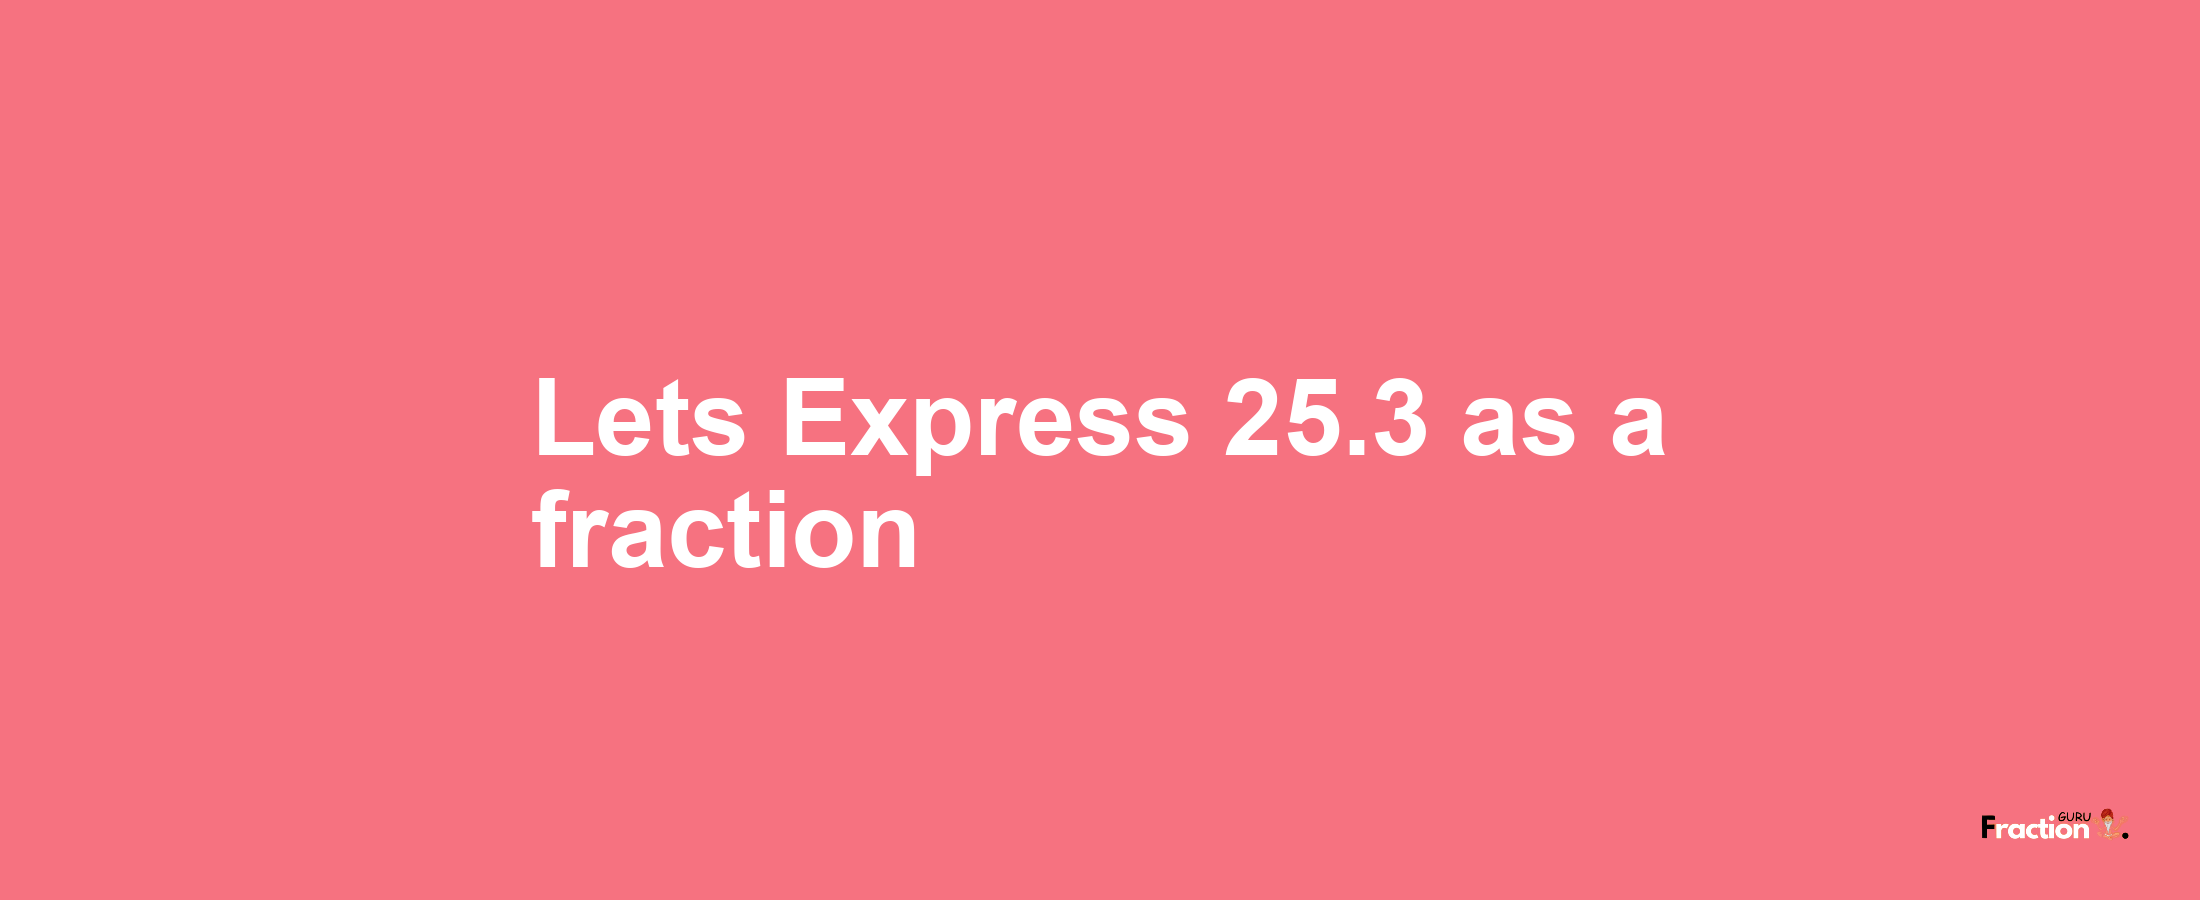 Lets Express 25.3 as afraction